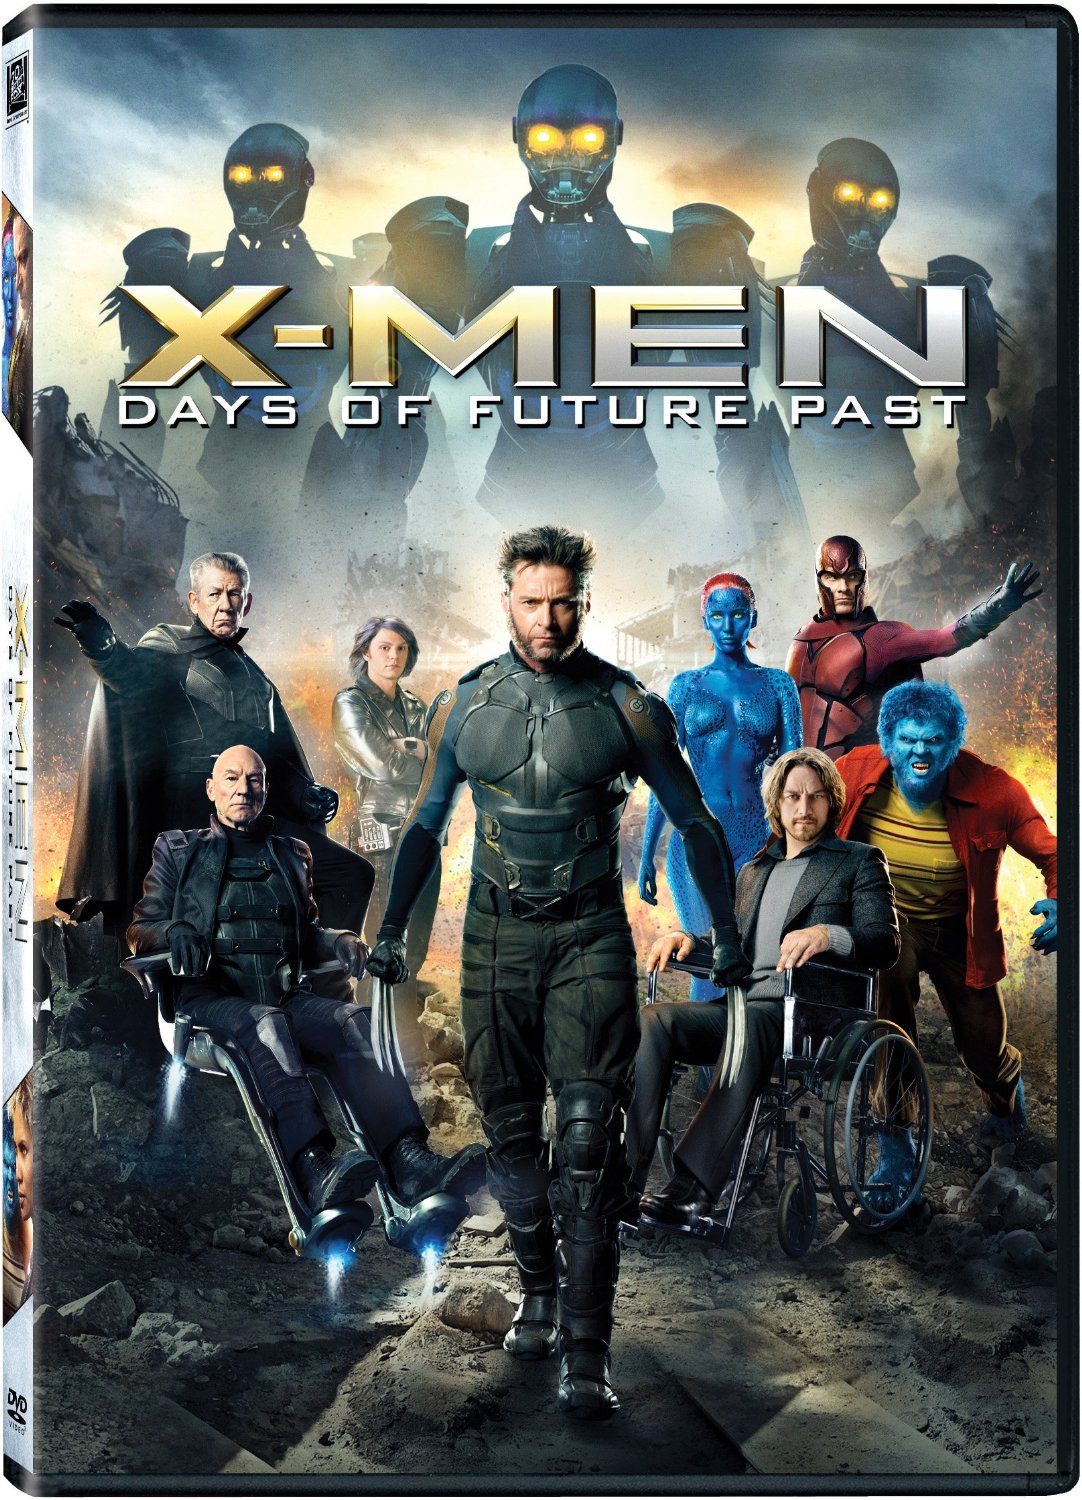 X-Men Days of Future Past DVD Only $8.49 at Target